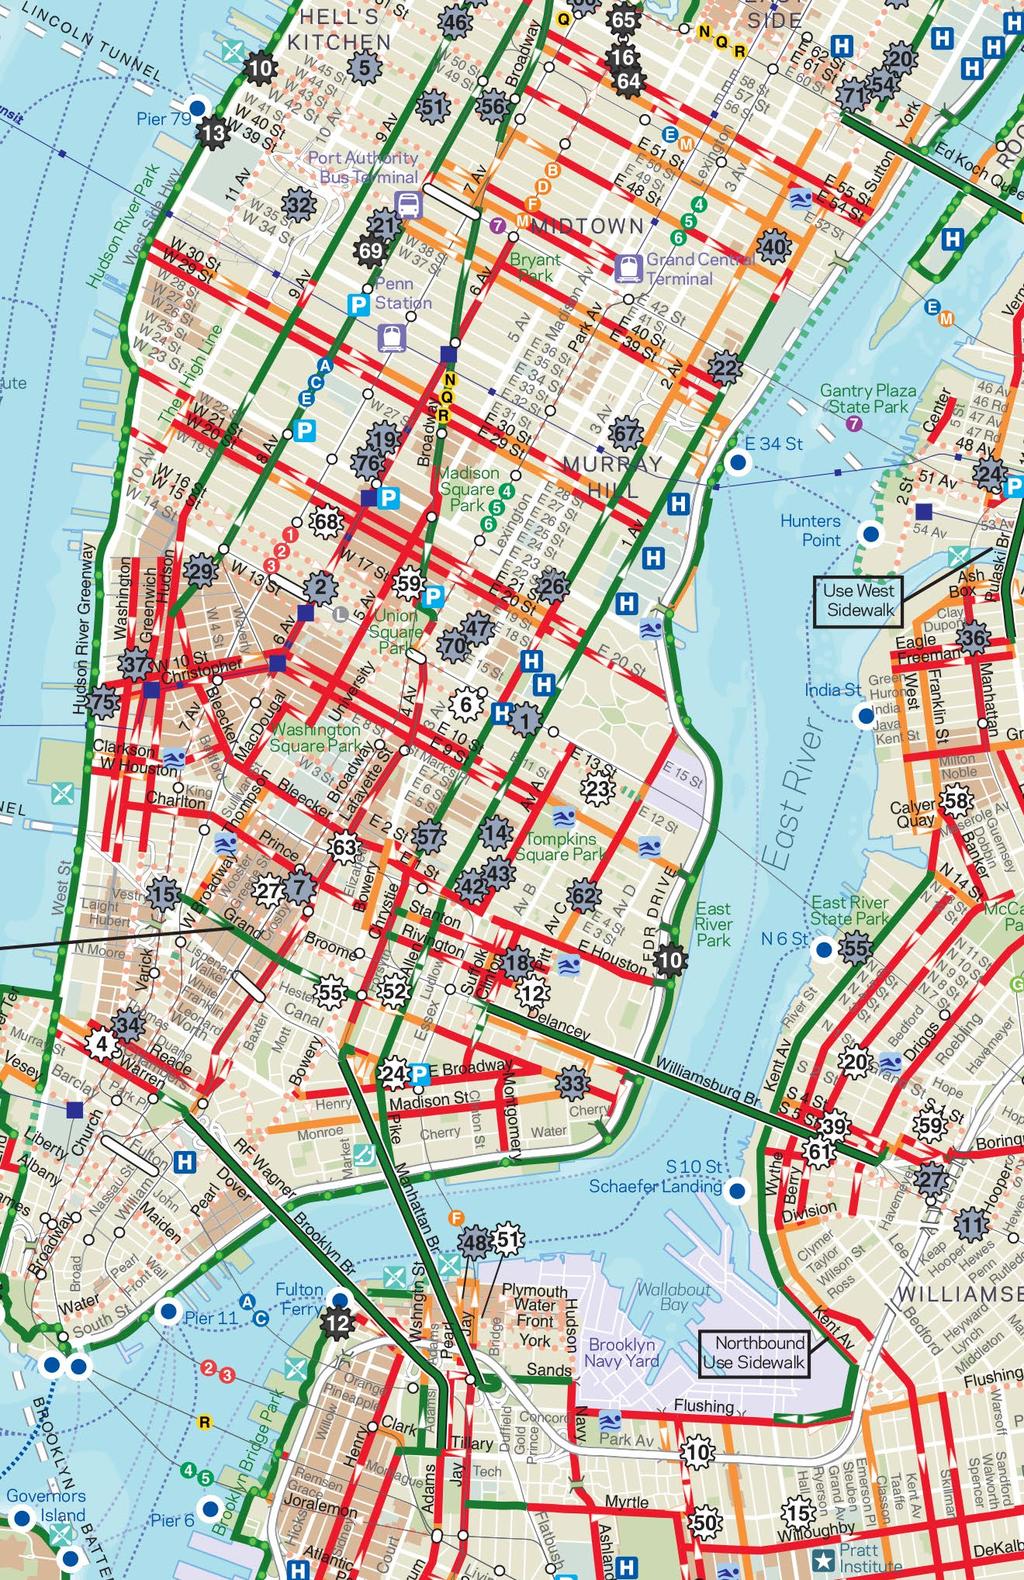 NYC Bike Map Know Your Lanes New York City s more than 800 miles of bike facilities are